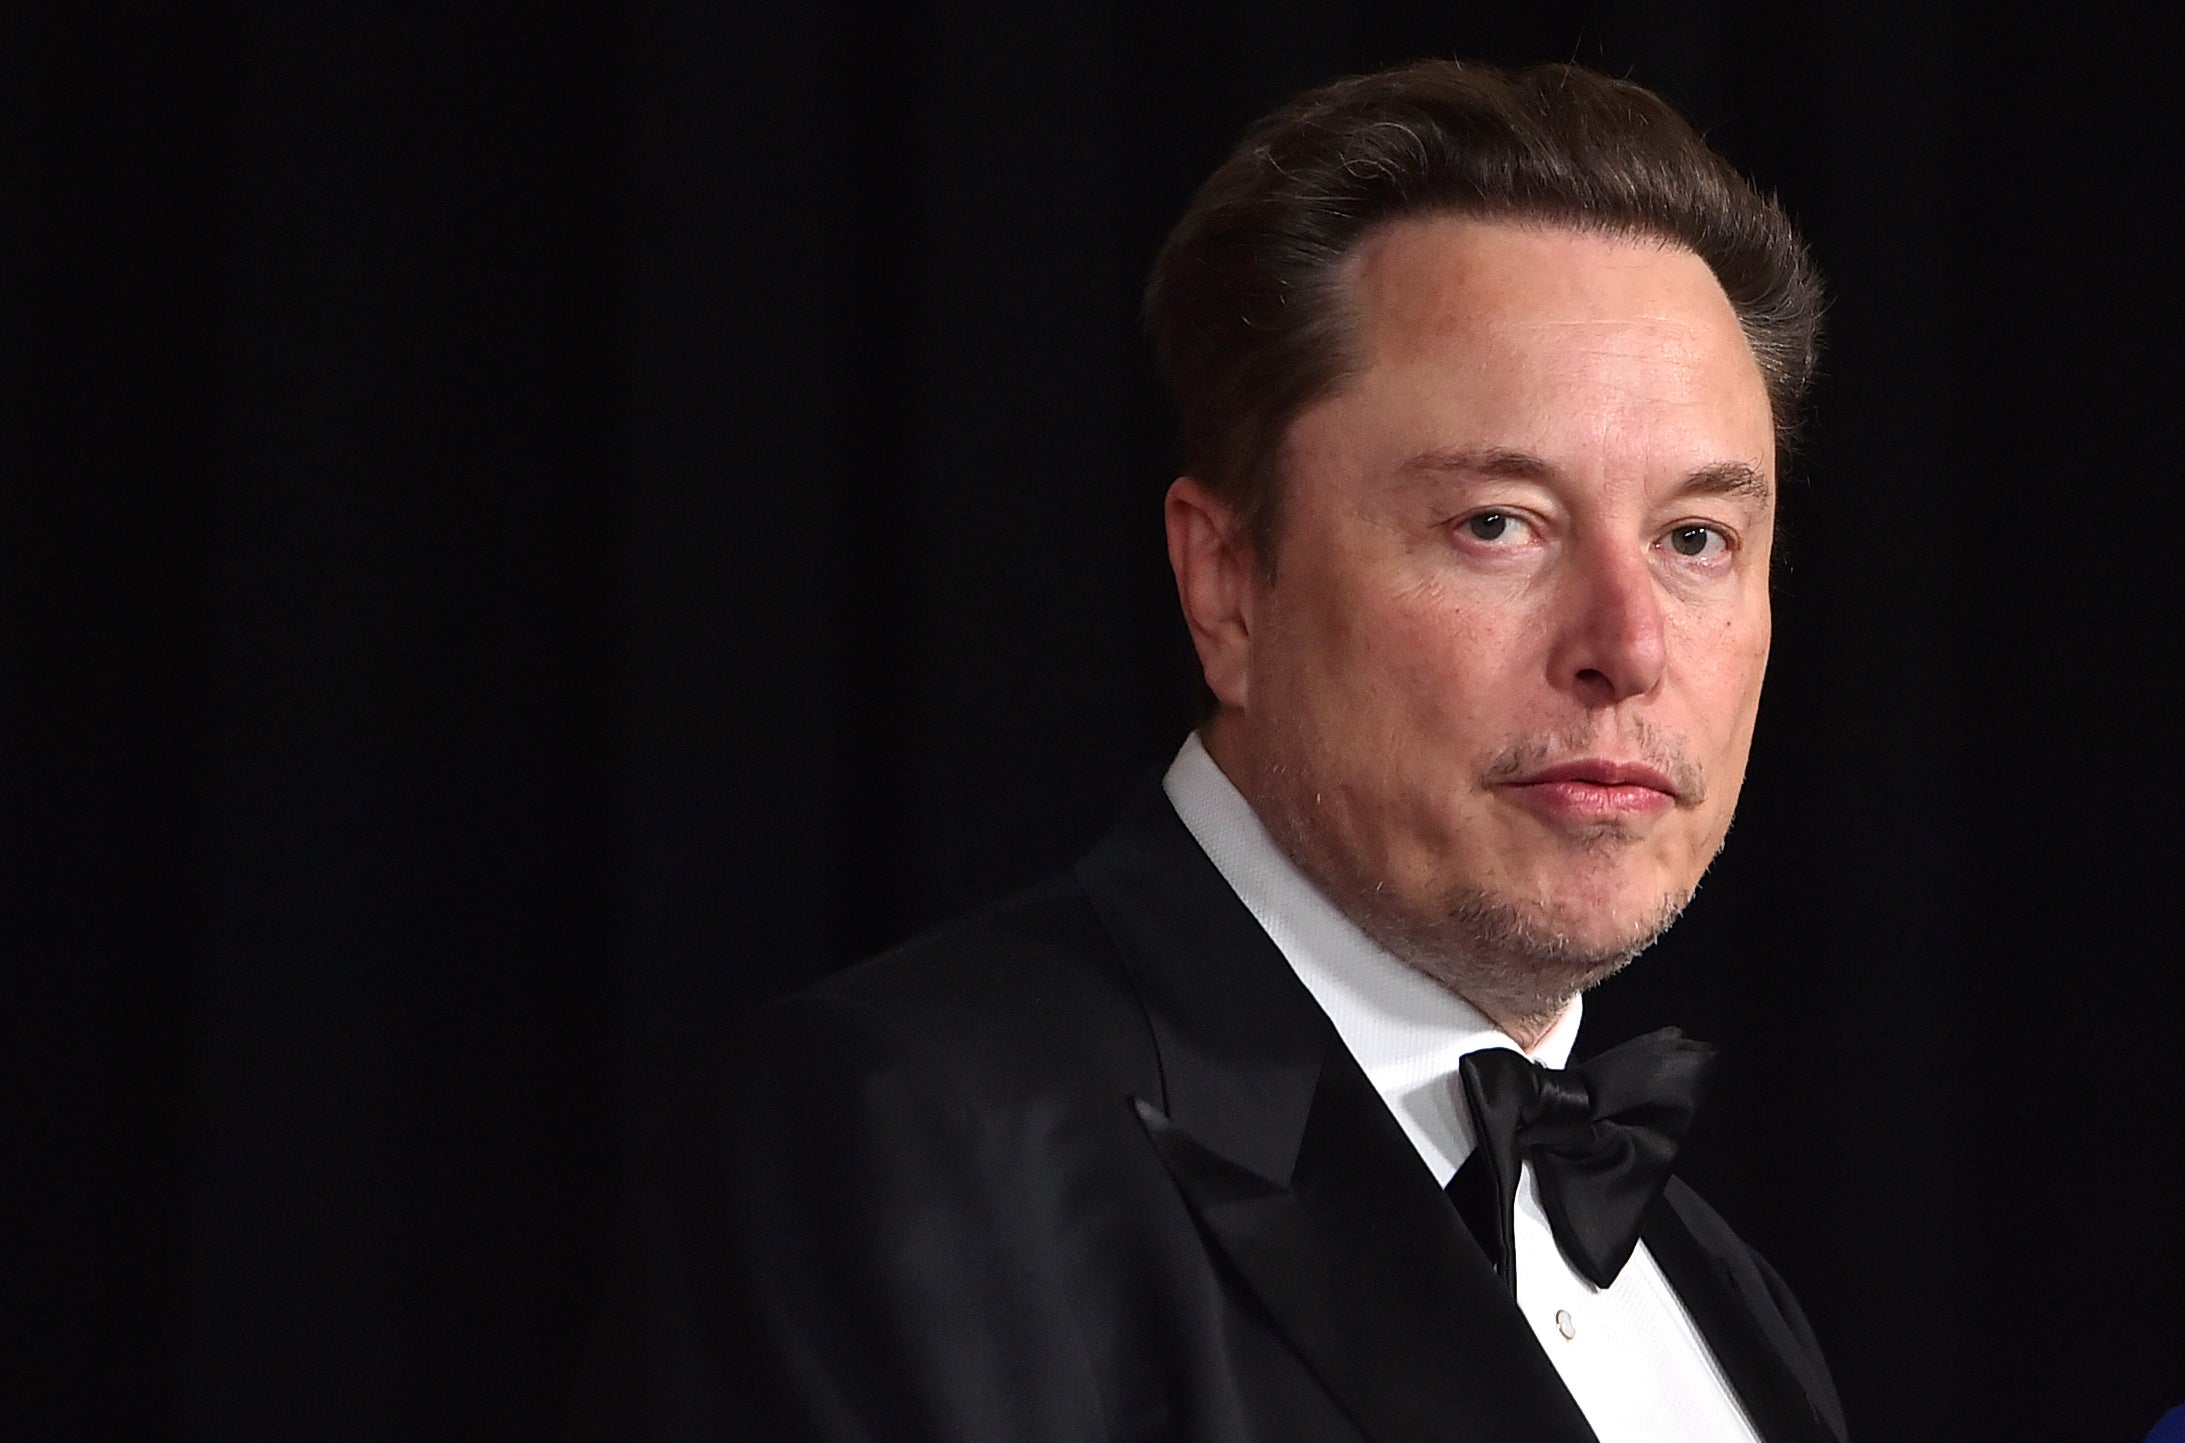 Elon Musk arrives at an event in Los Angeles in April. He also reportedly hosted an ‘anti-Biden’ dinner party in the city last month